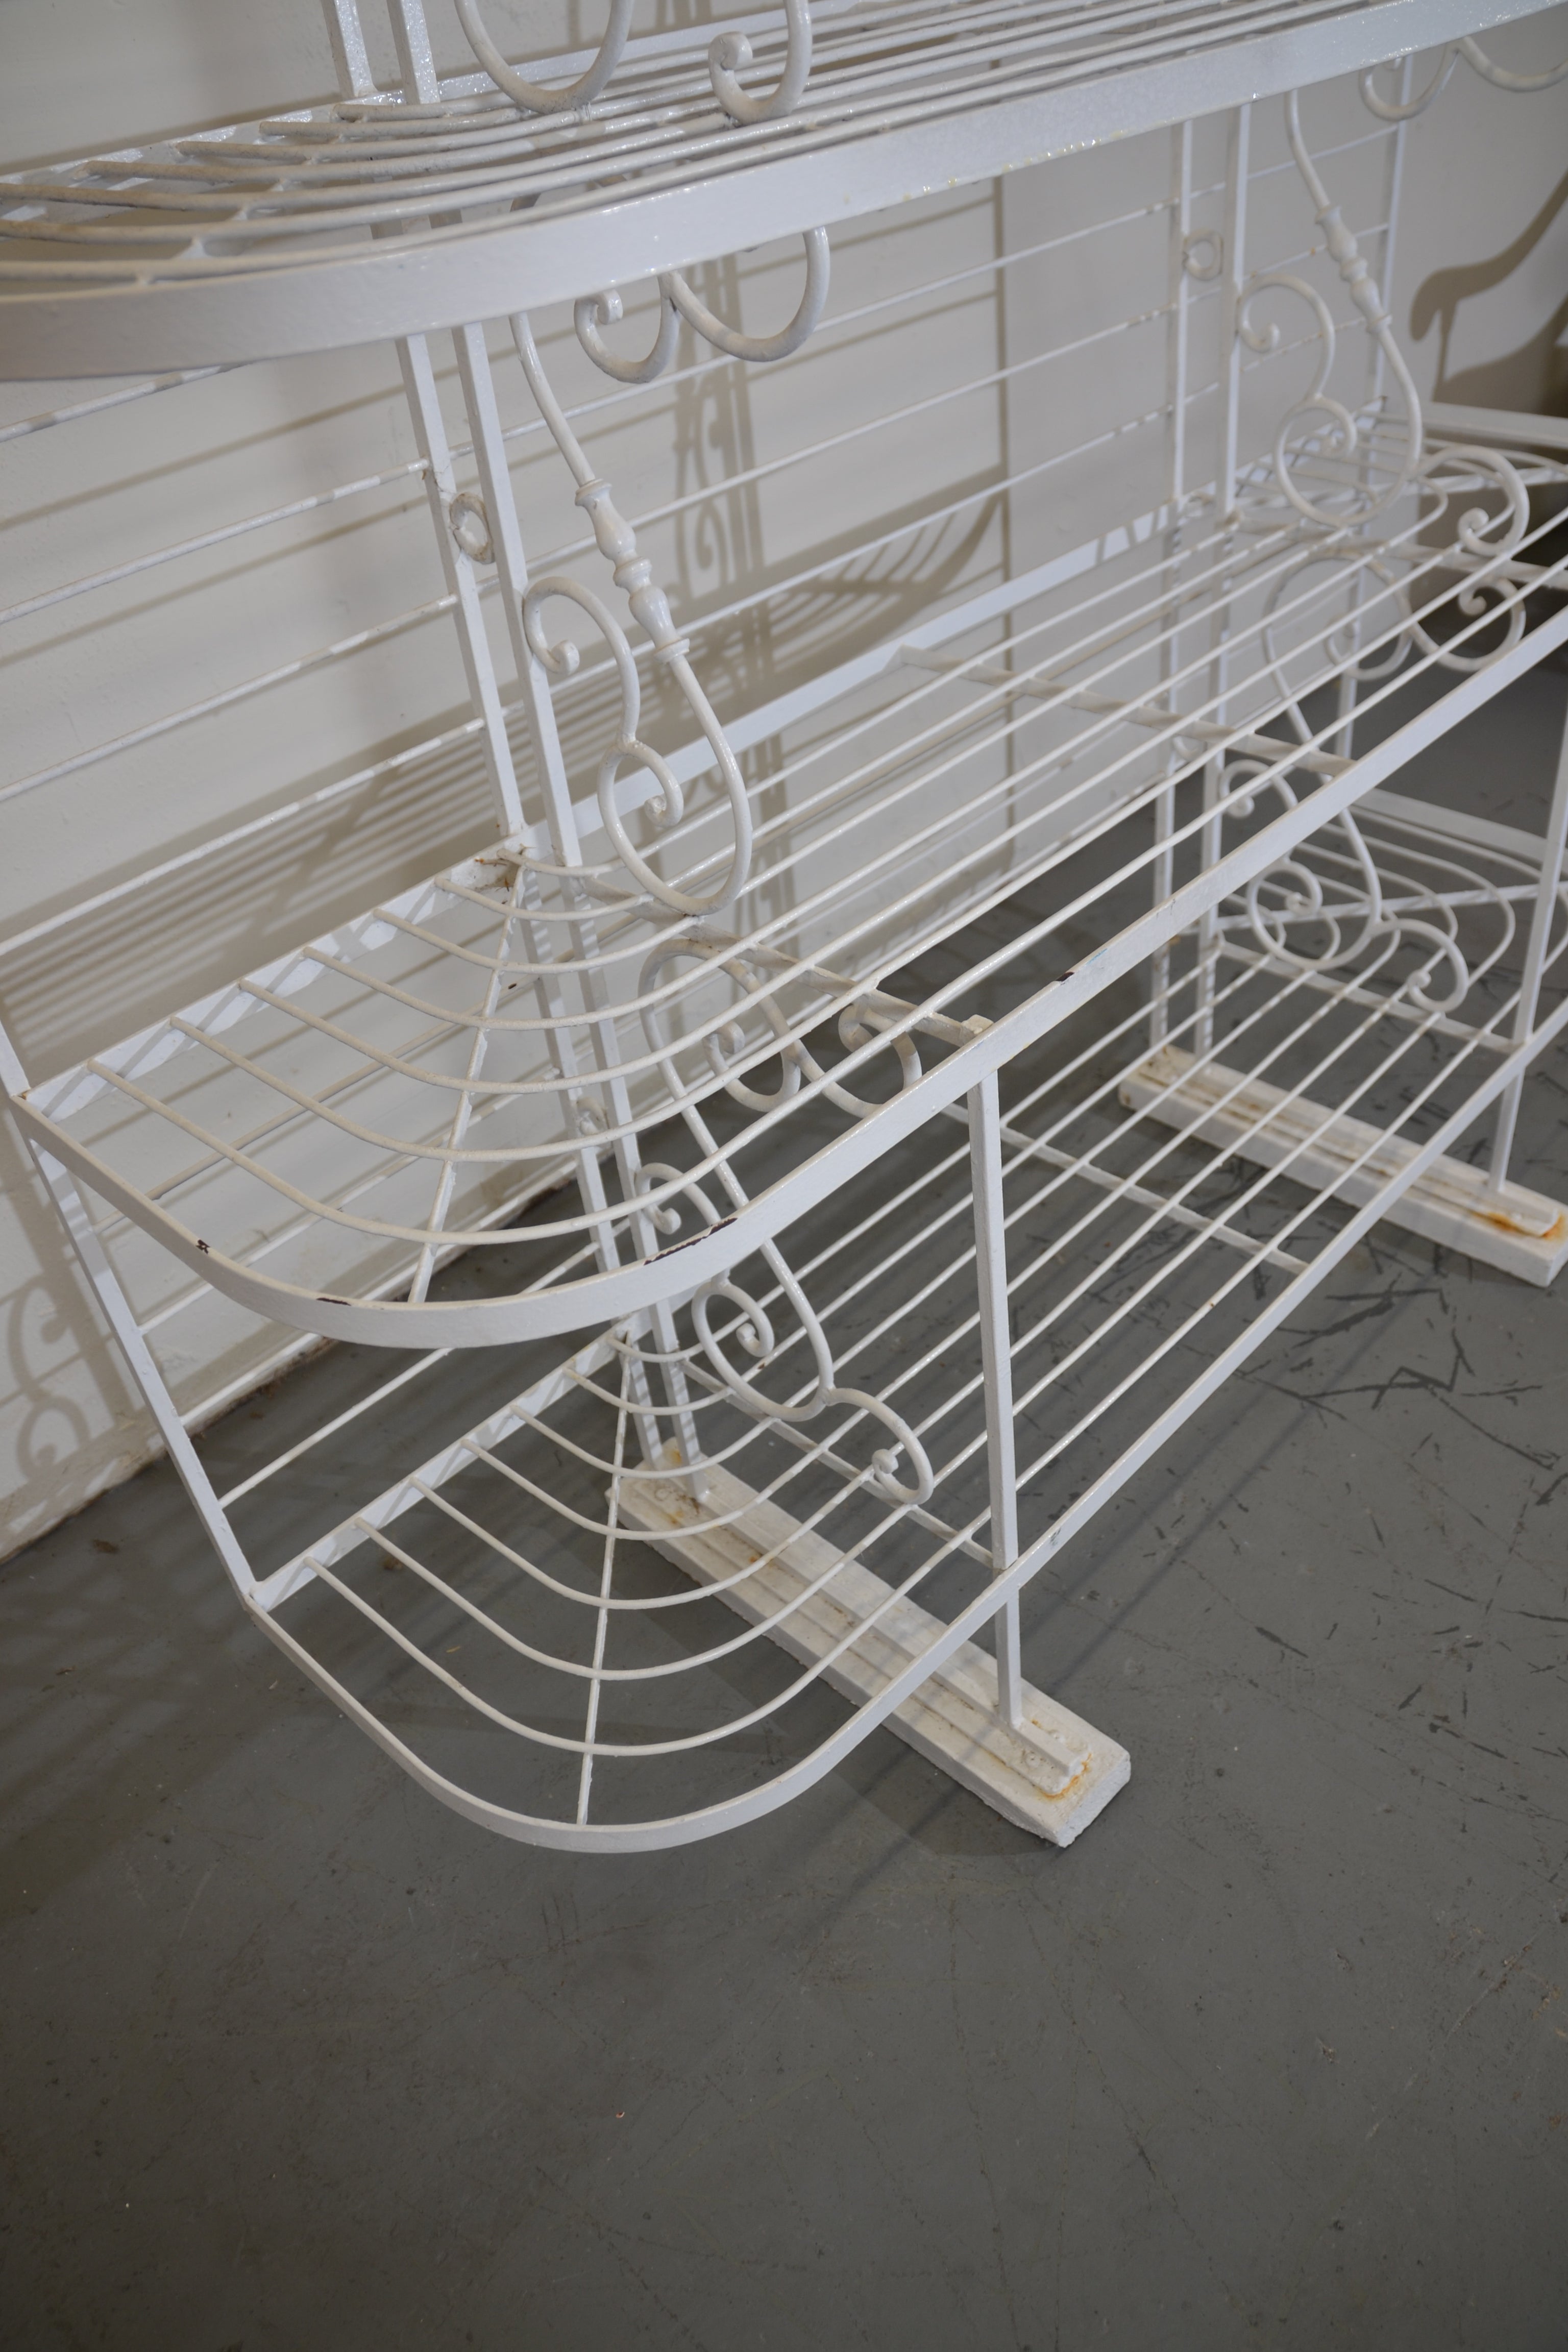 1950s  iron French baker's rack. A small shelve on each side and three large shelves on the bottom. The iron feet are standing on wood.